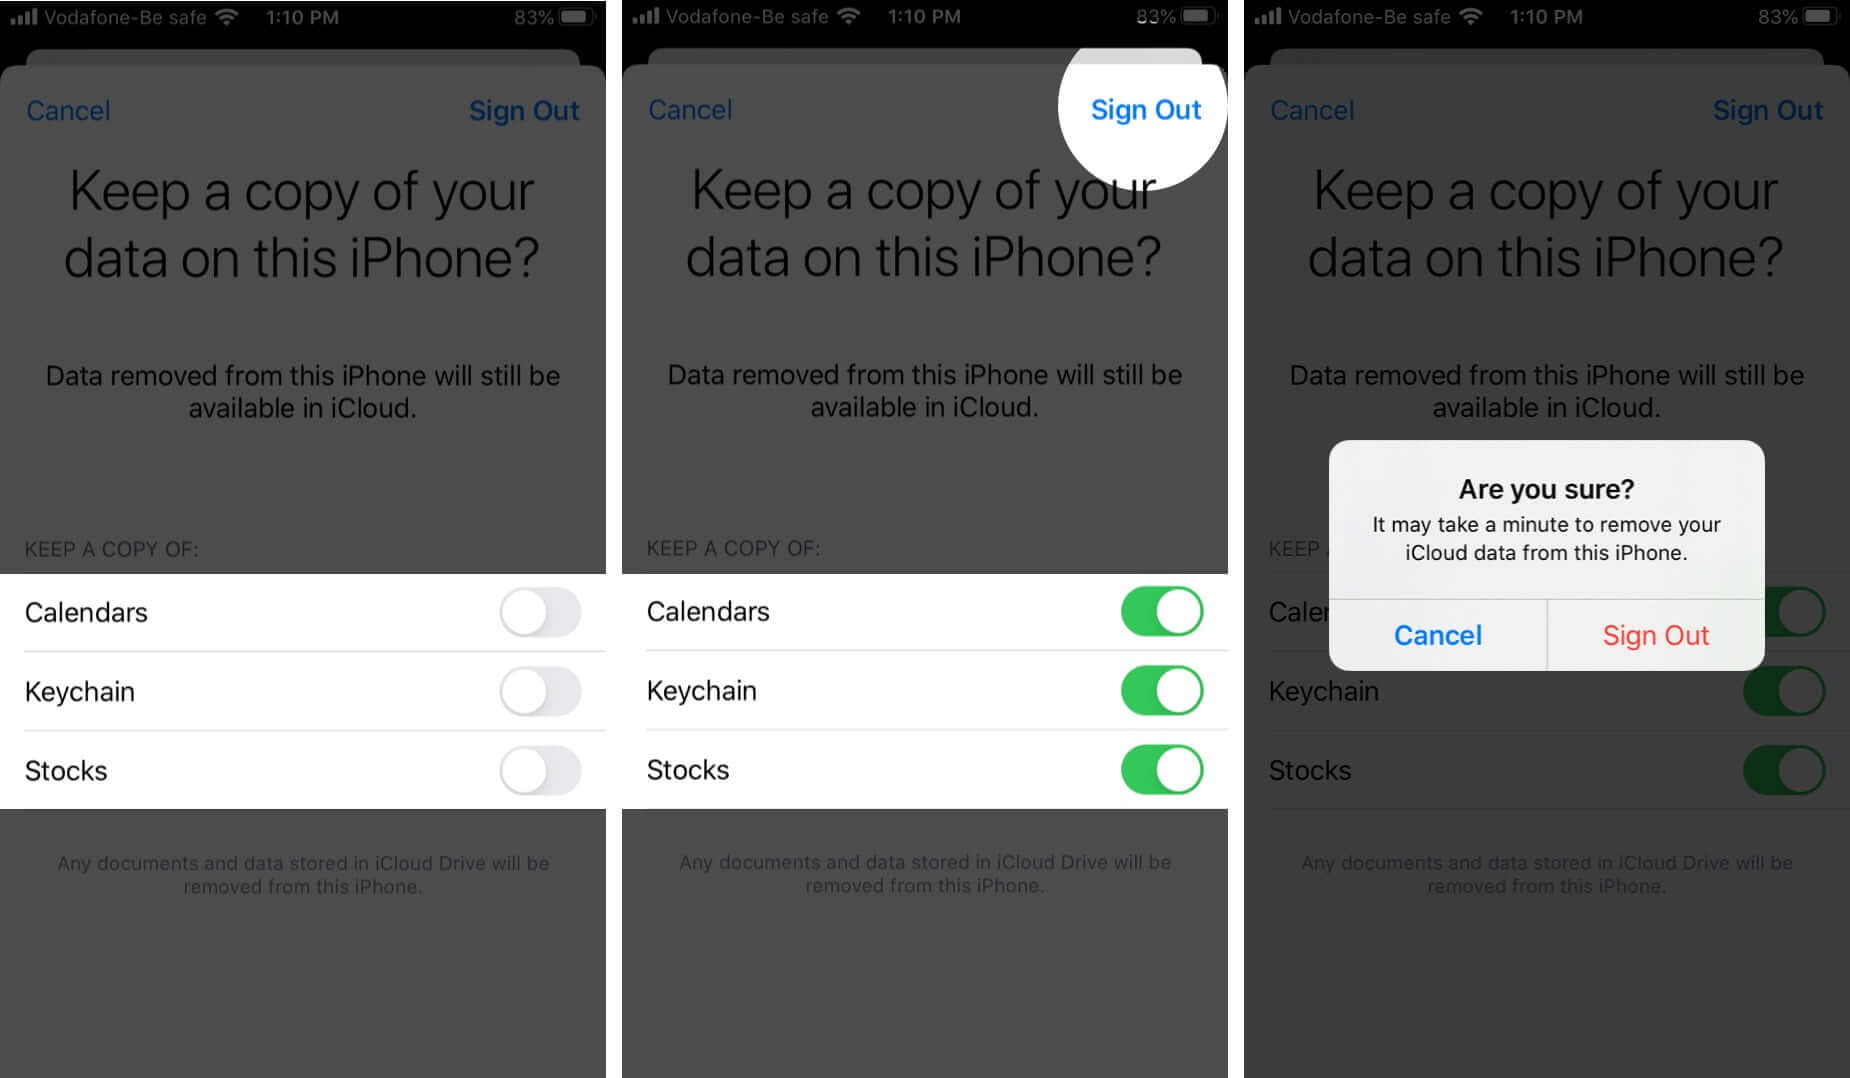 turn on options and tap on sign out to remove icloud account from iphone